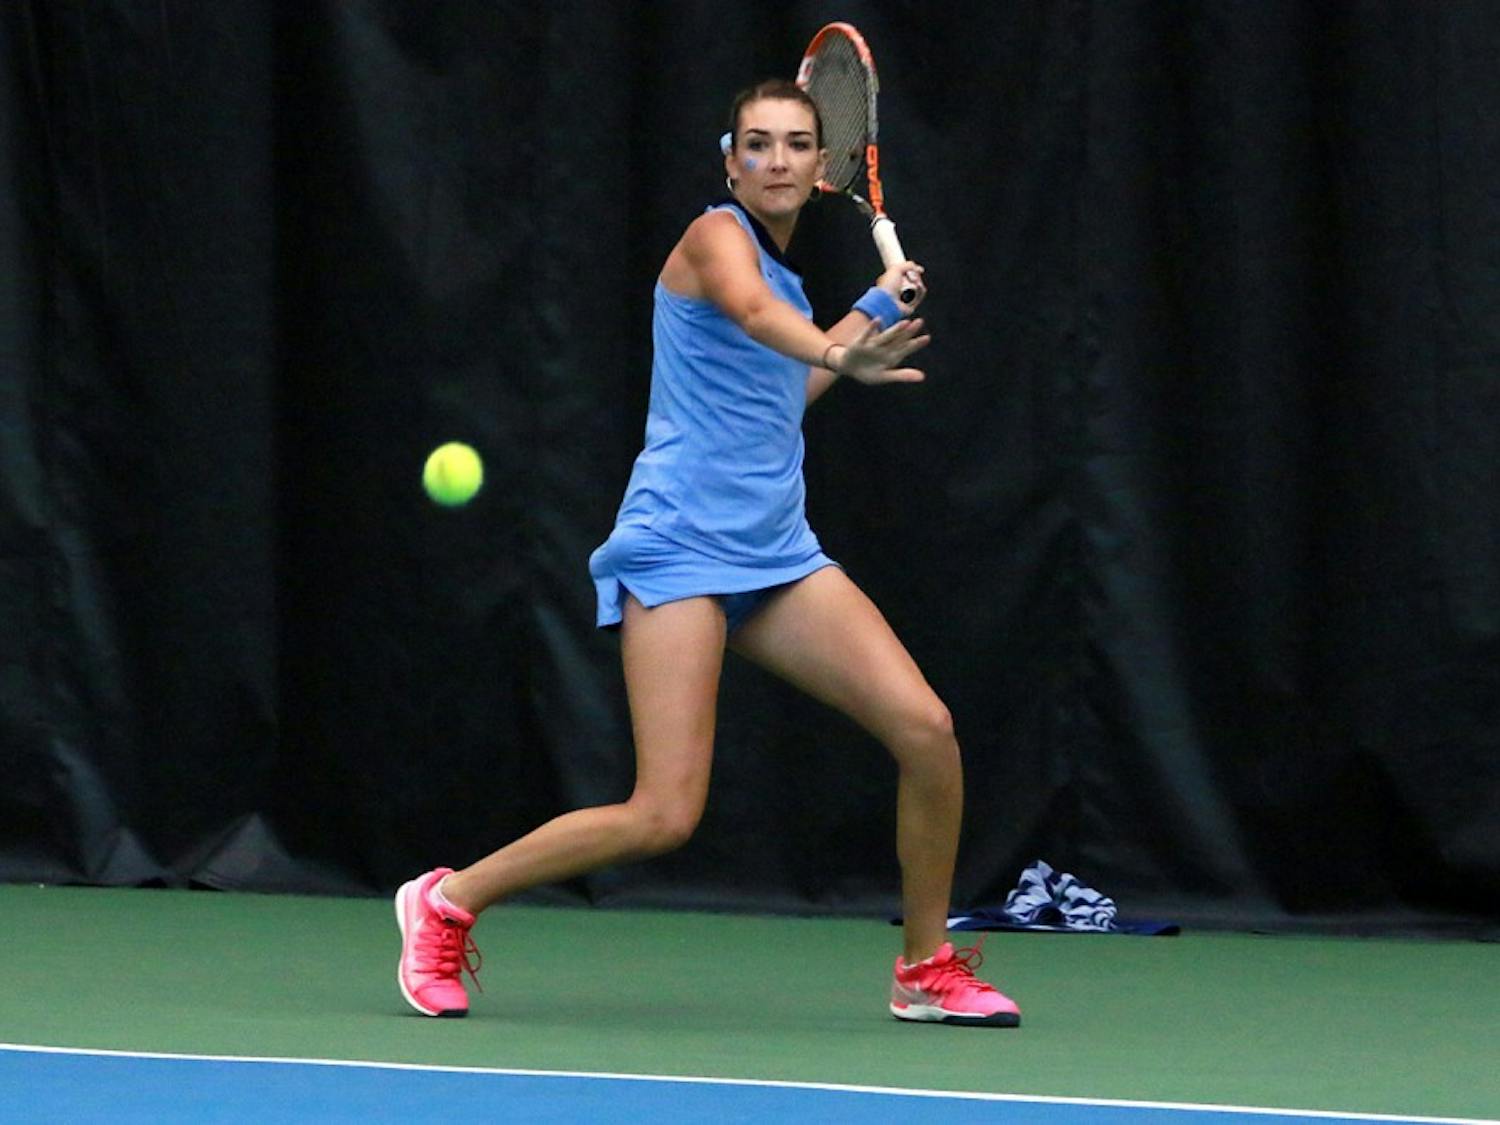 Carolina Price, the only senior on the women's tennis team, returns the ball. Price defeated Samantha Harris during the singles competition.